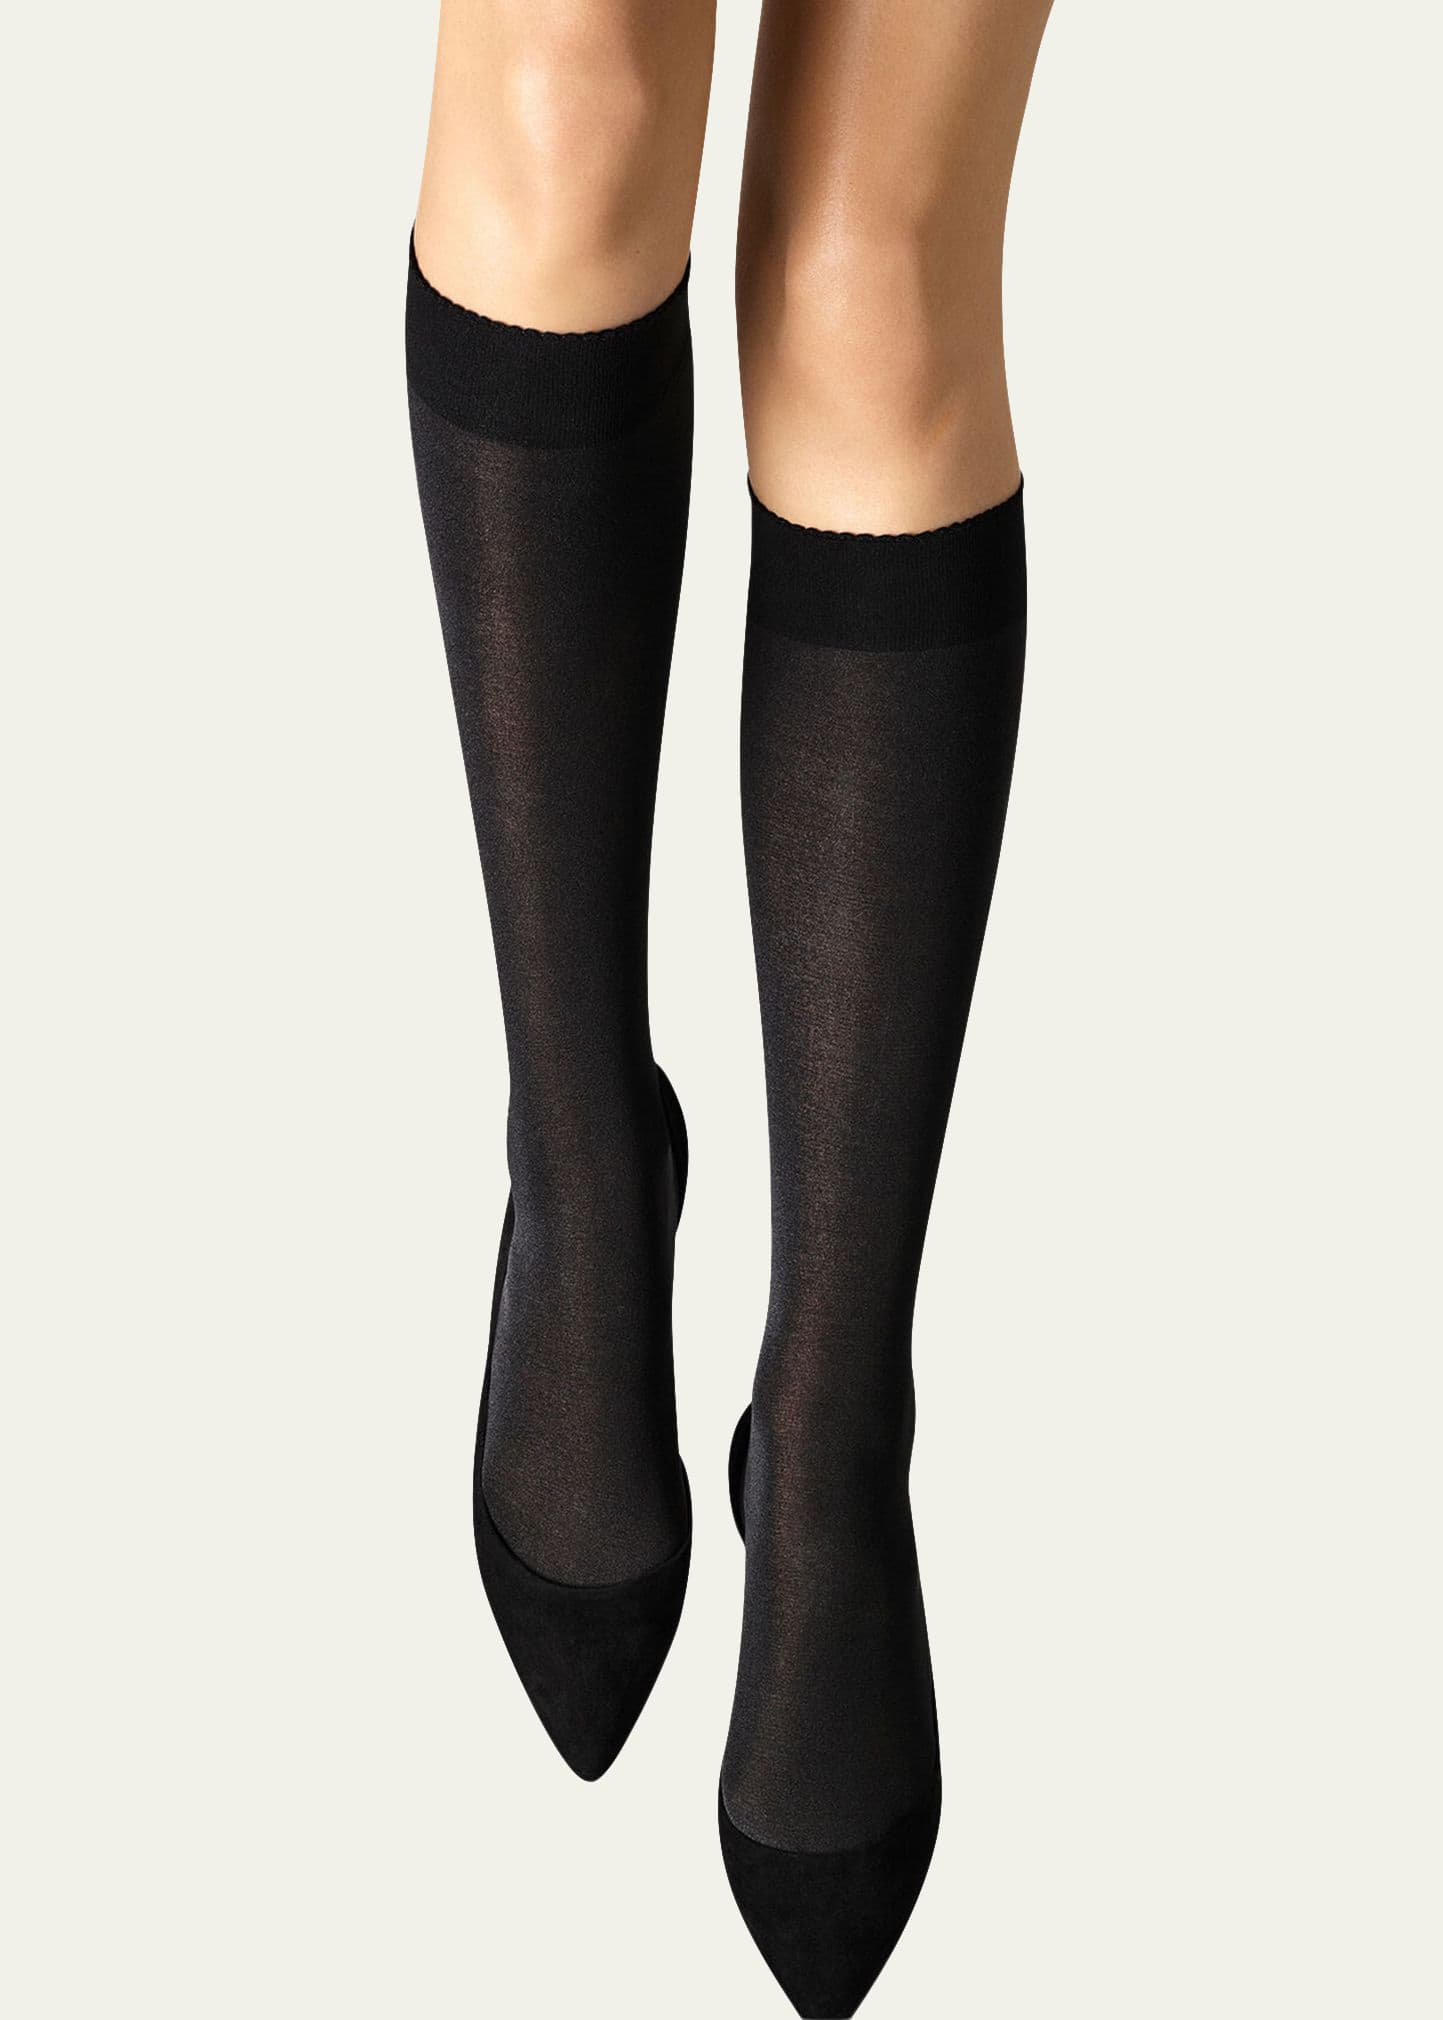 Wolford Velvet De Luxe Stay-Up Thigh Highs Stockings - Bergdorf